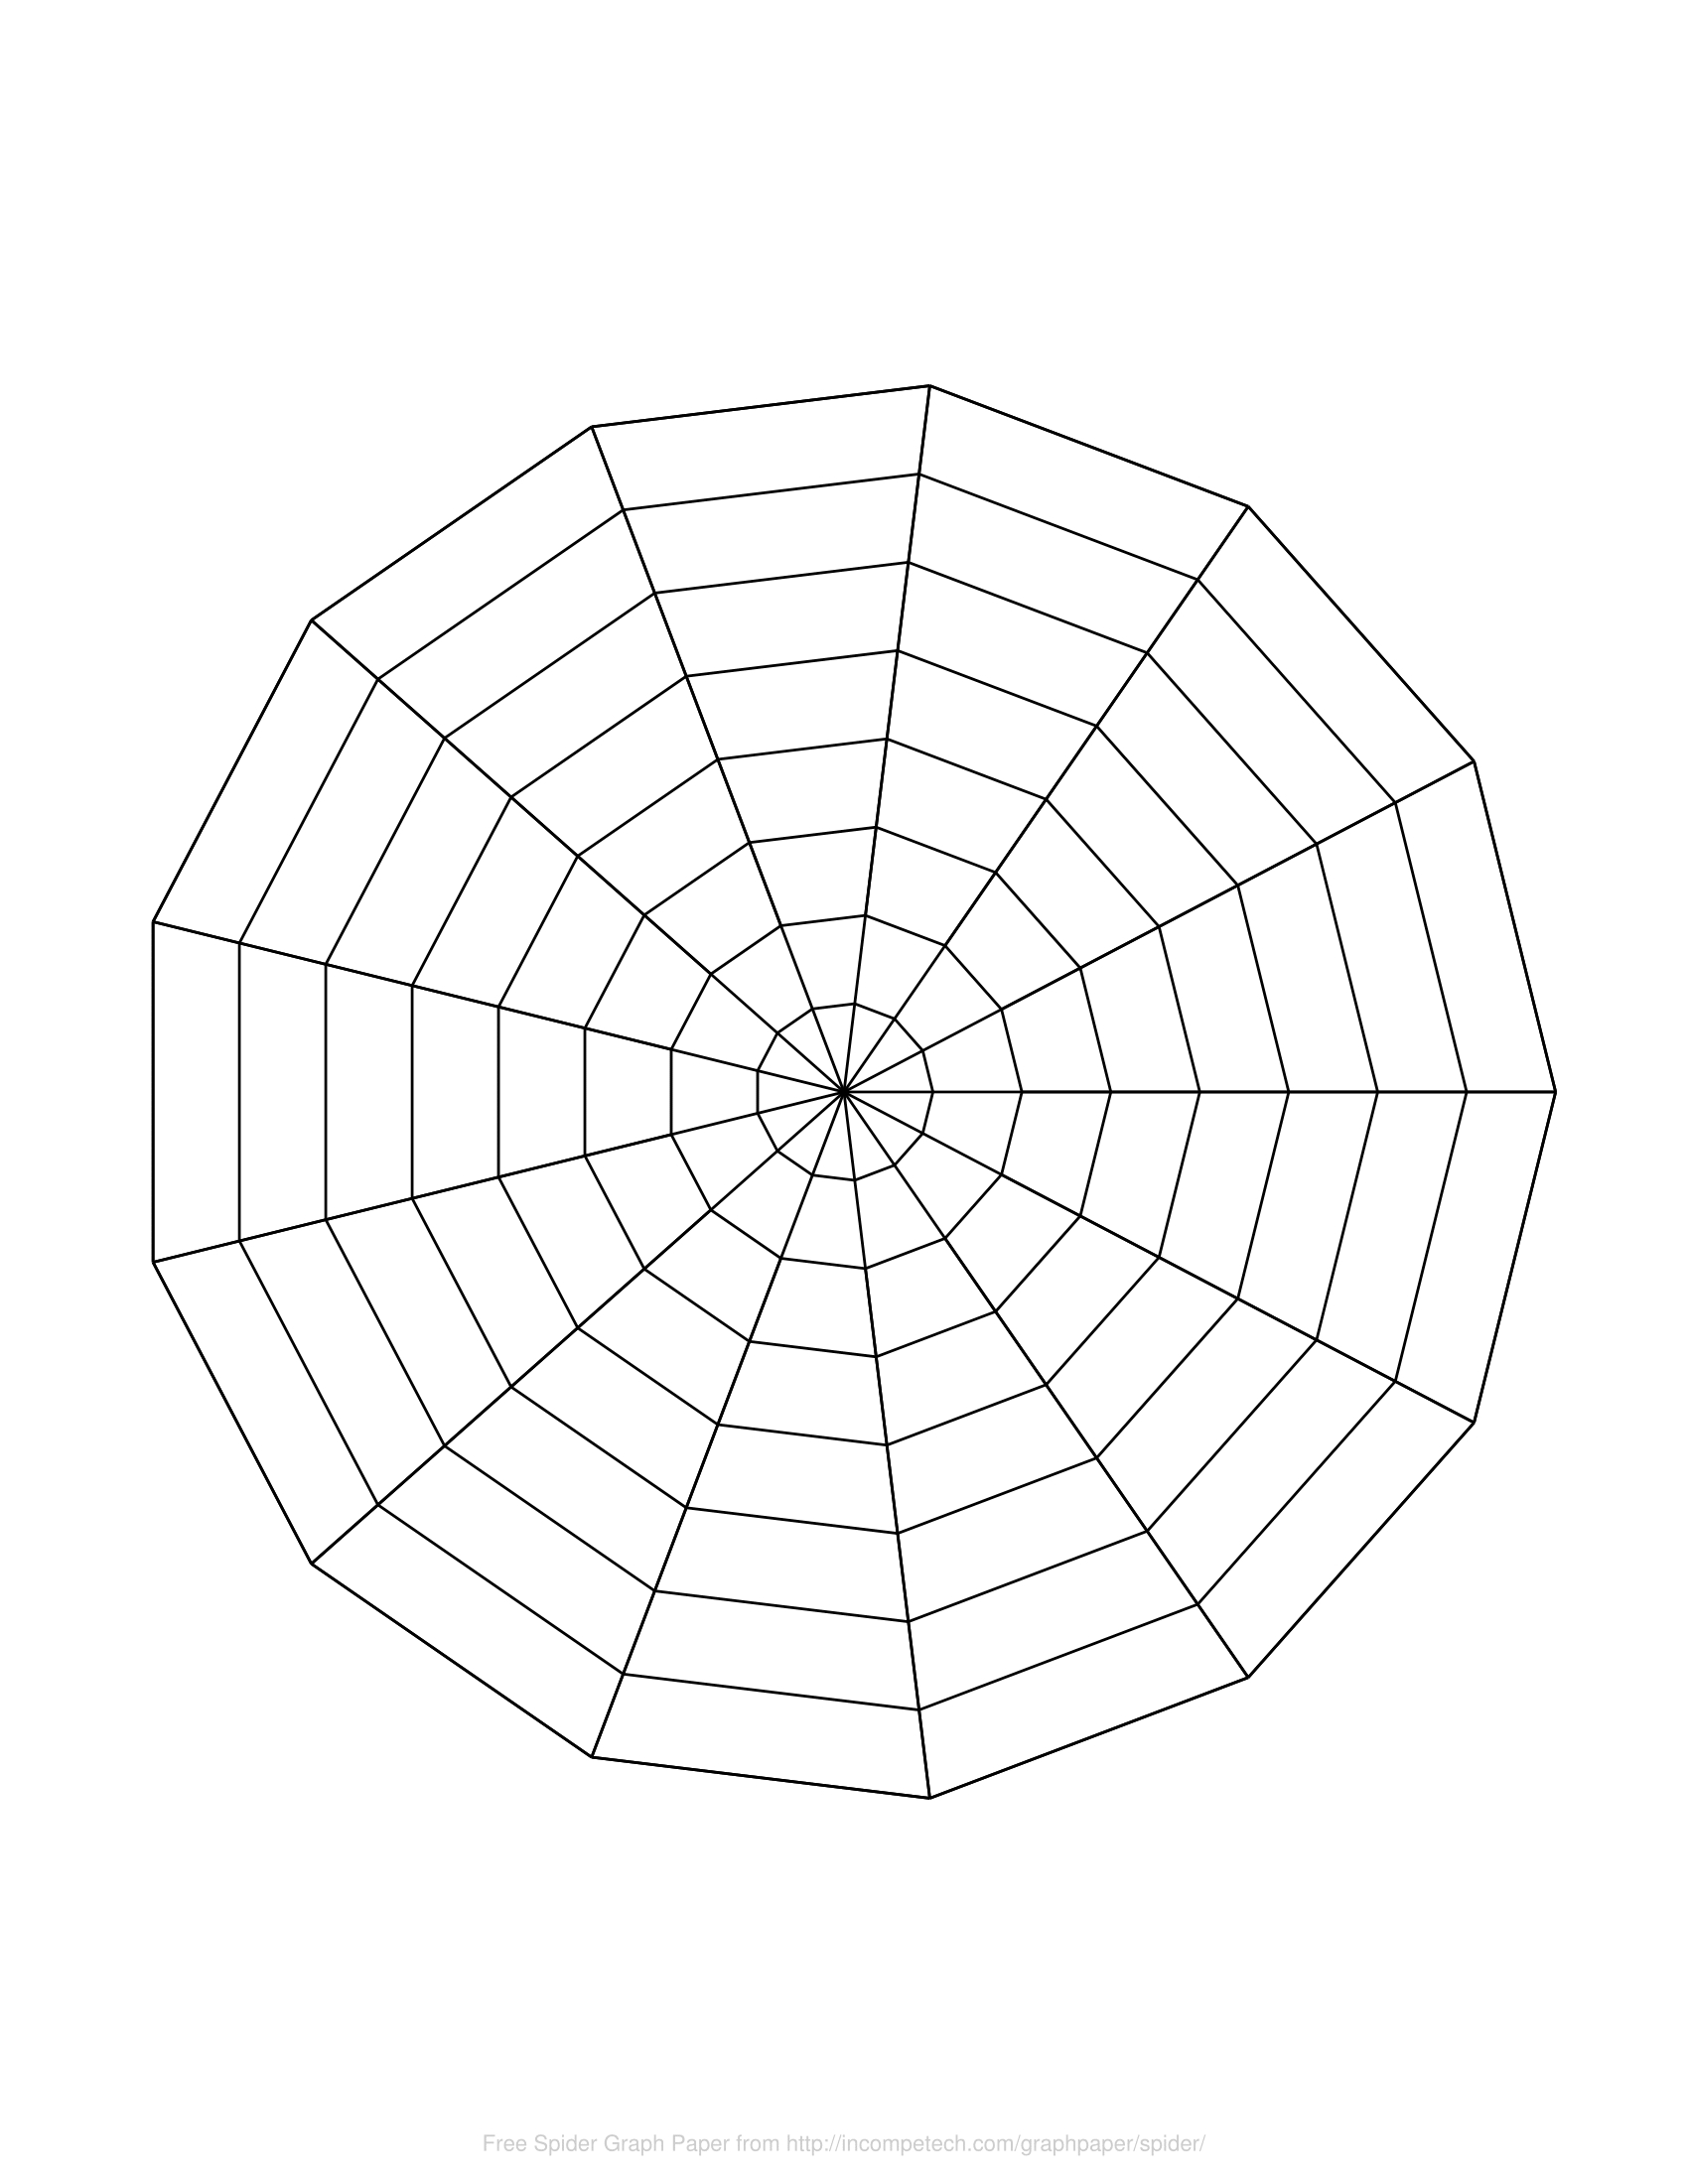 Spider Web Diagram Blank – User Guide Of Wiring Diagram With Blank Radar Chart Template